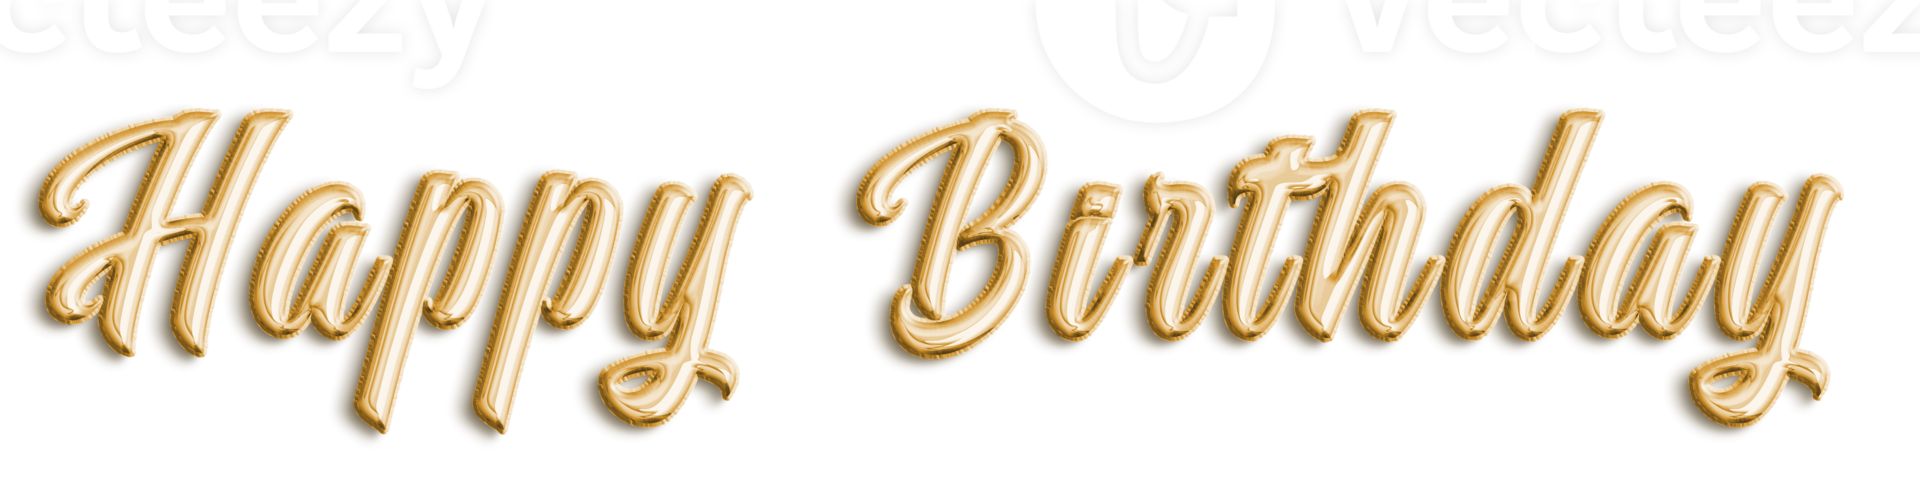 Golden Volumetric 3D Text Balloons Lettering Happy Birthday cut out png